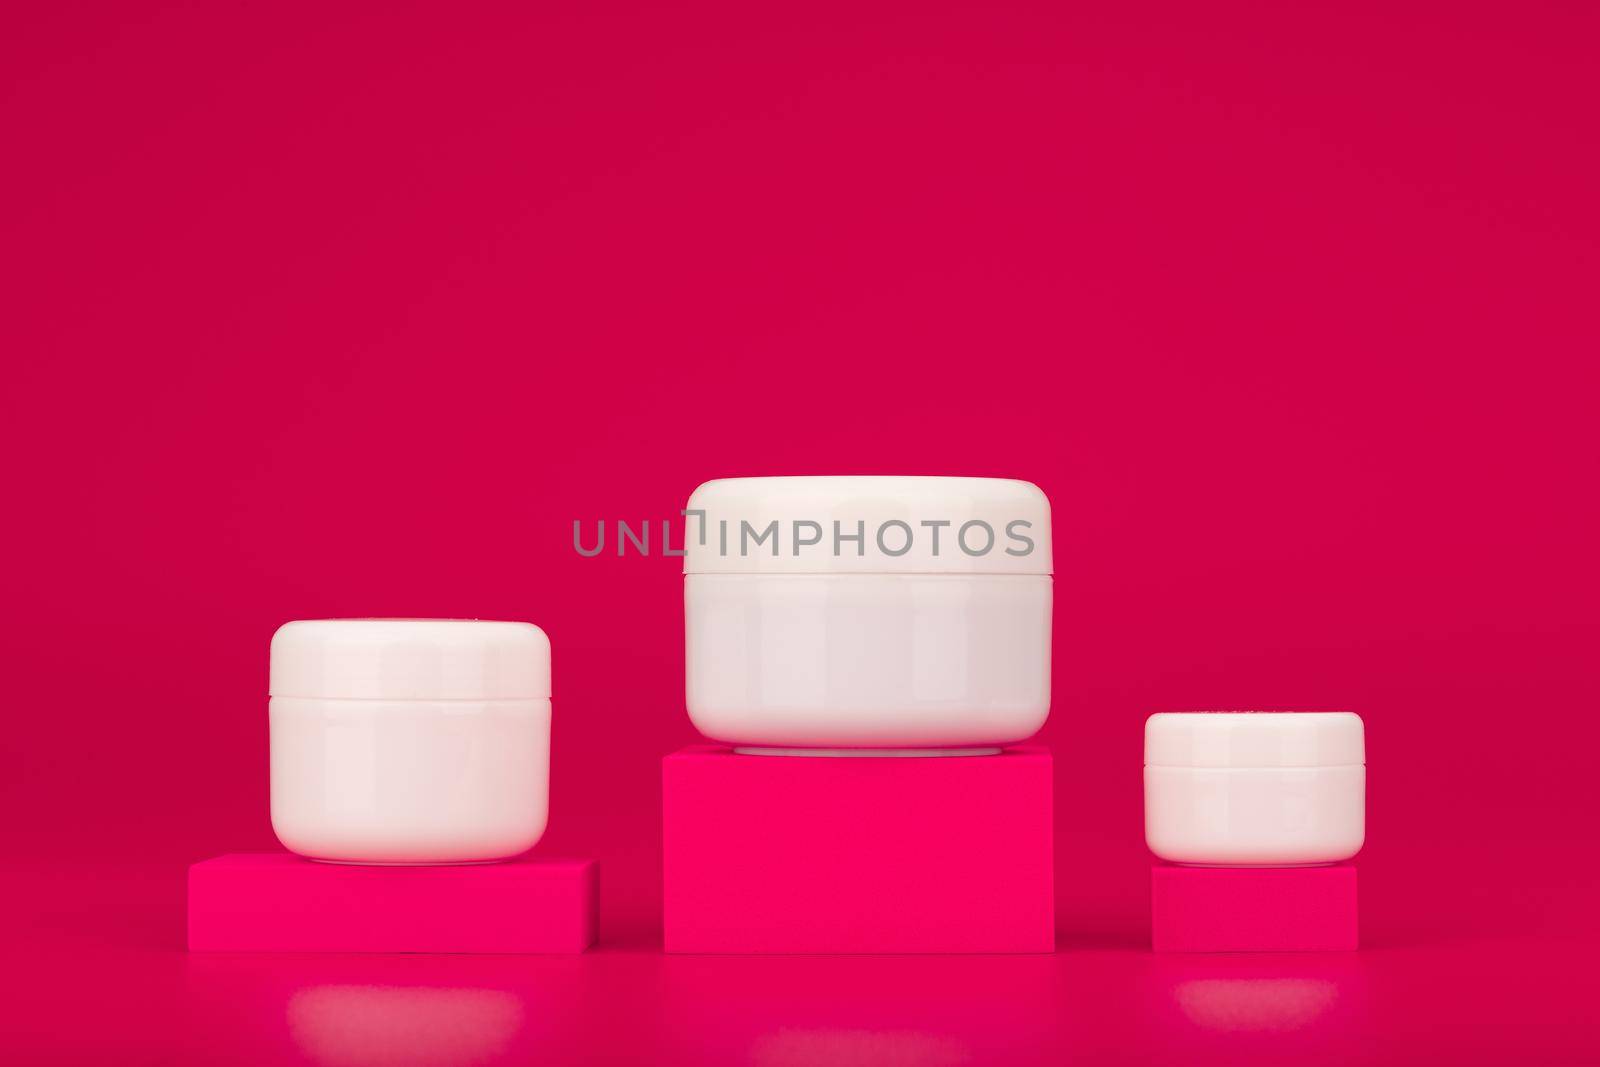 Set of creams for face, neck and under eye skin on pink pedestals against pink background with copy space. Unbranded cosmetic jars on shopfront. Concept of skin care and beauty